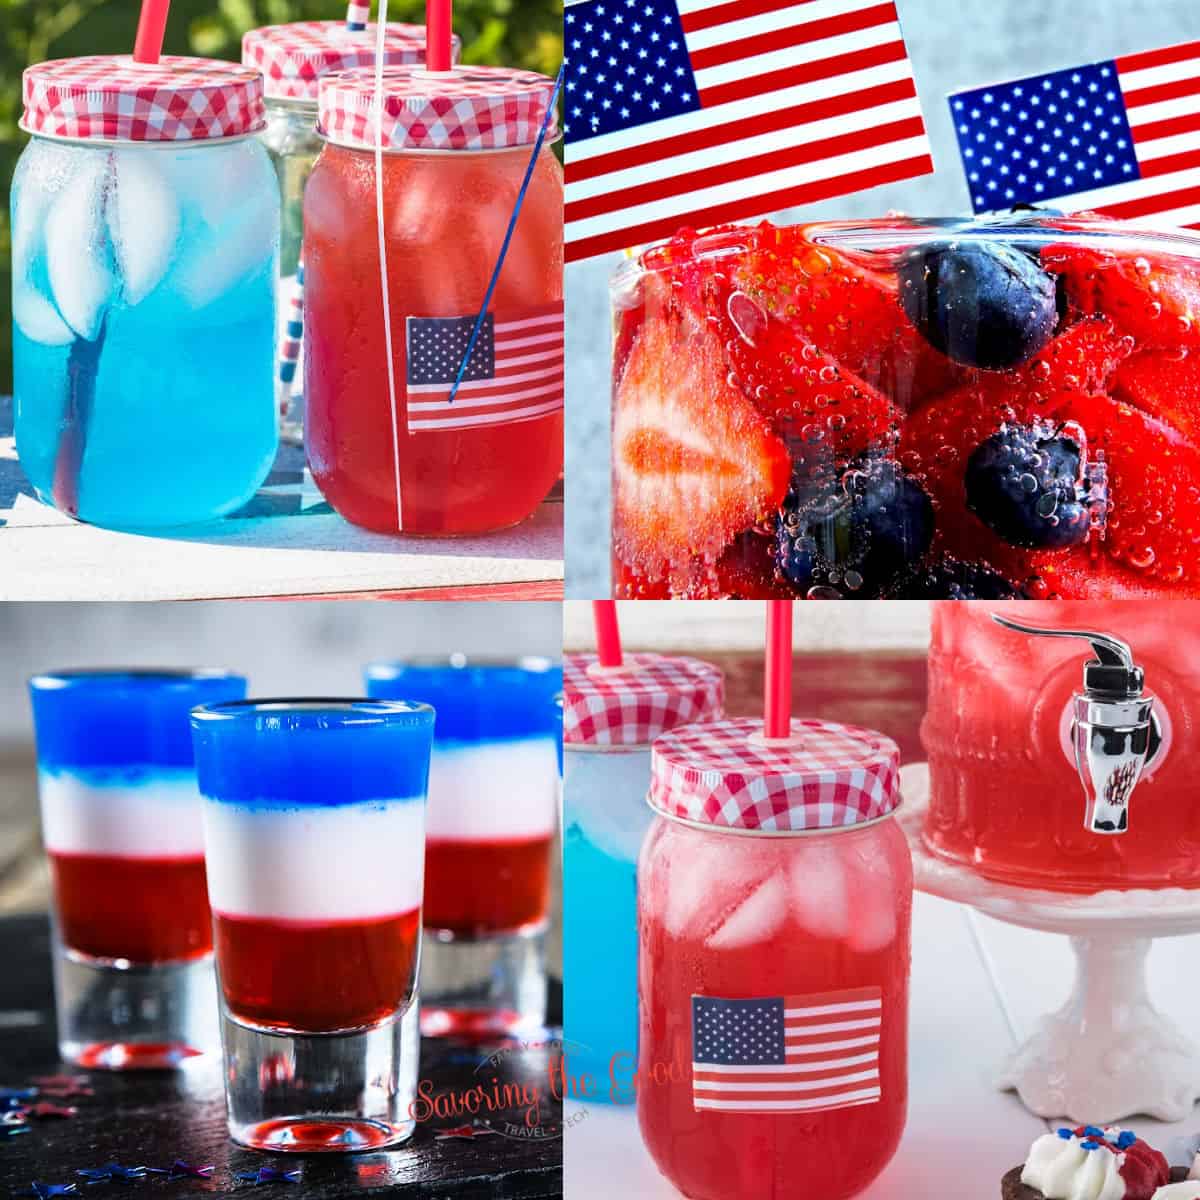 https://www.savoringthegood.com/wp-content/uploads/2022/05/Red-White-and-Blue-Mixed-Drinks-Cocktails-graphic..jpg